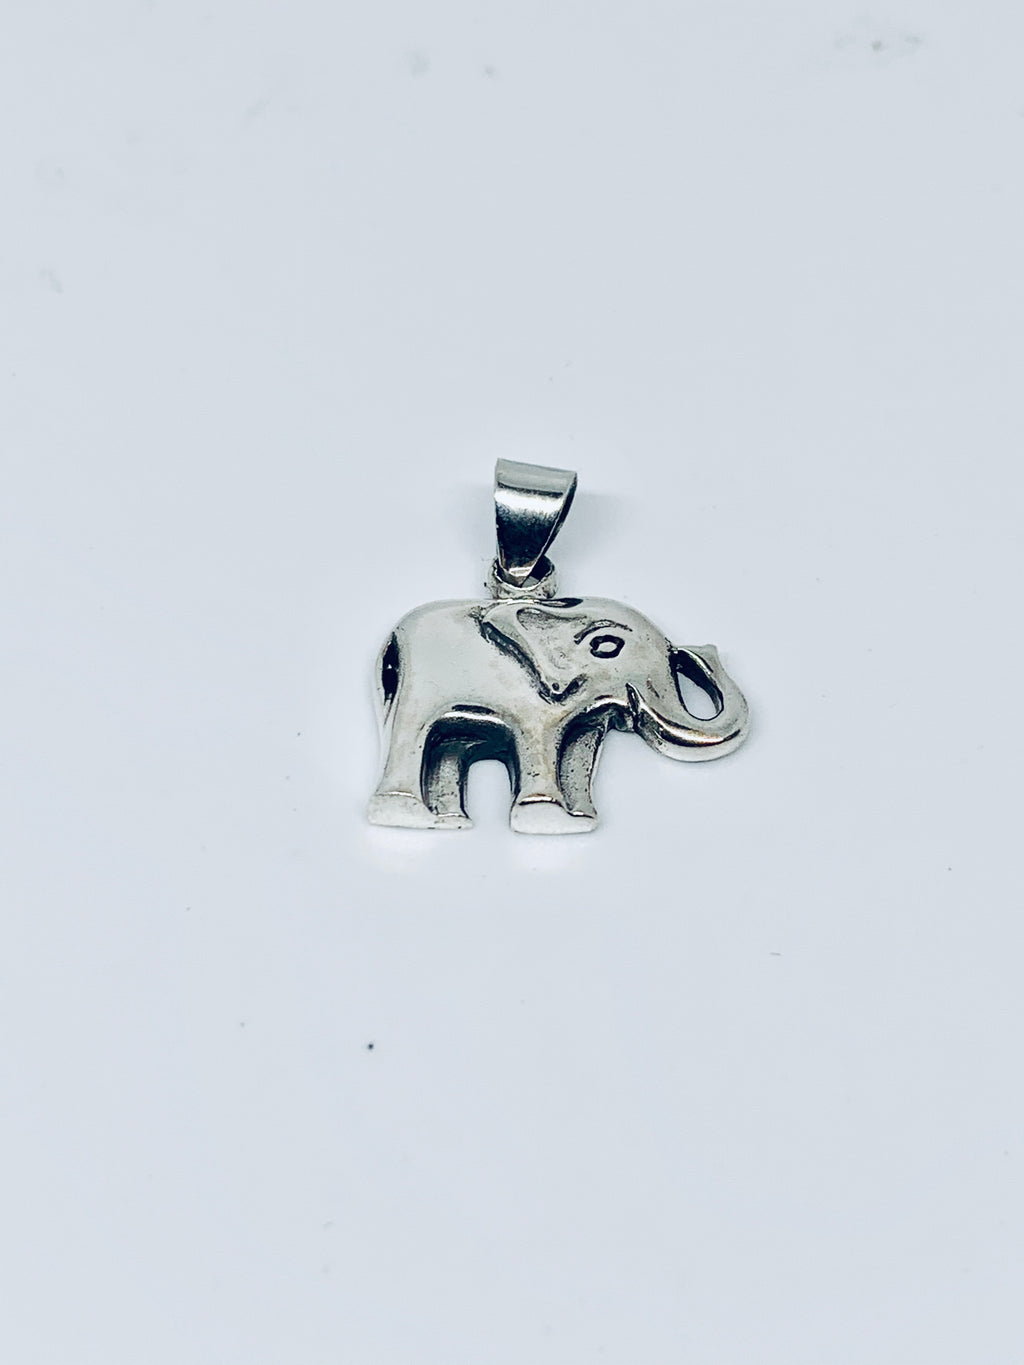 Specialty pendants/charms